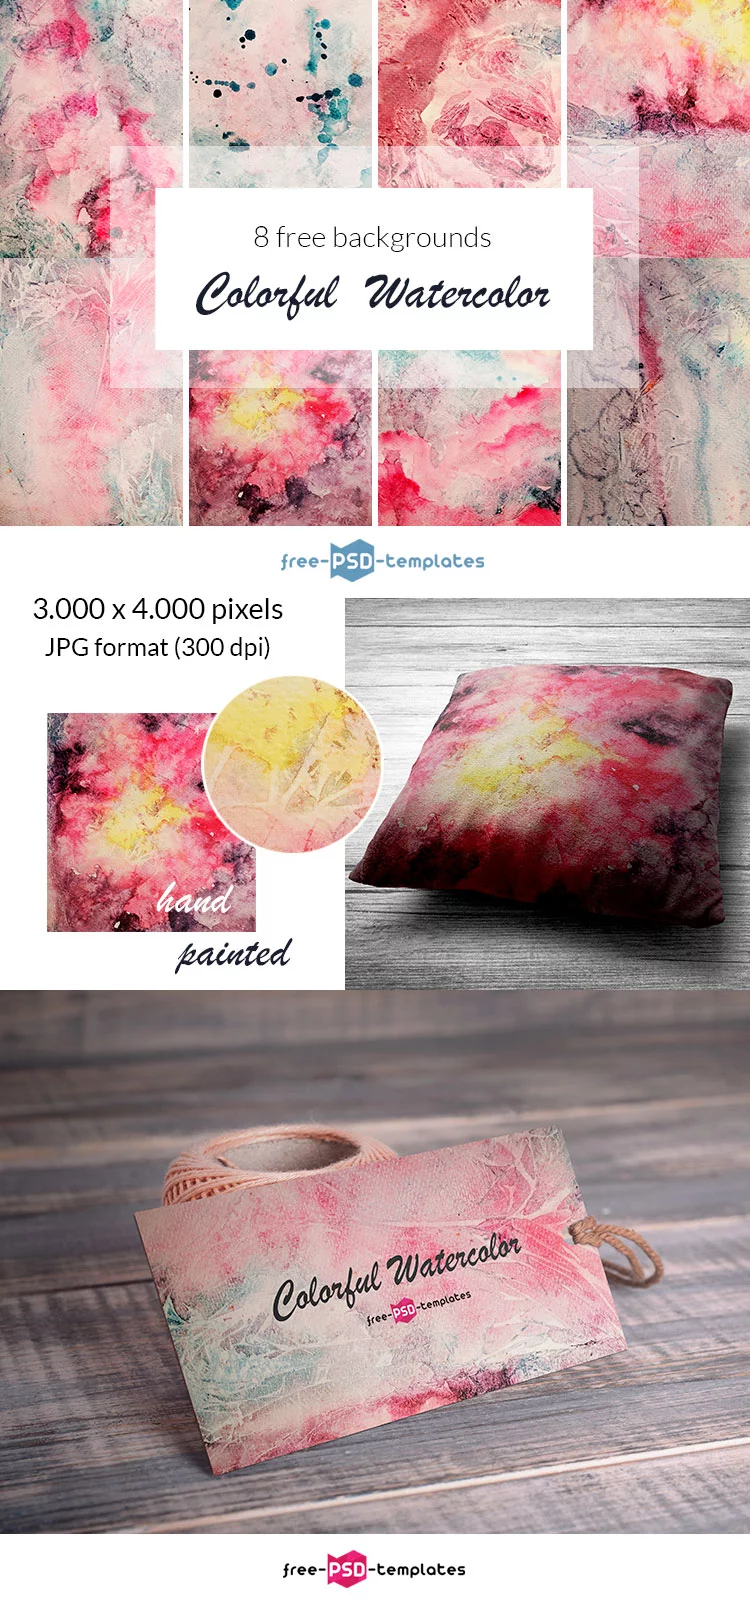 Free Colorful Watercolor Background